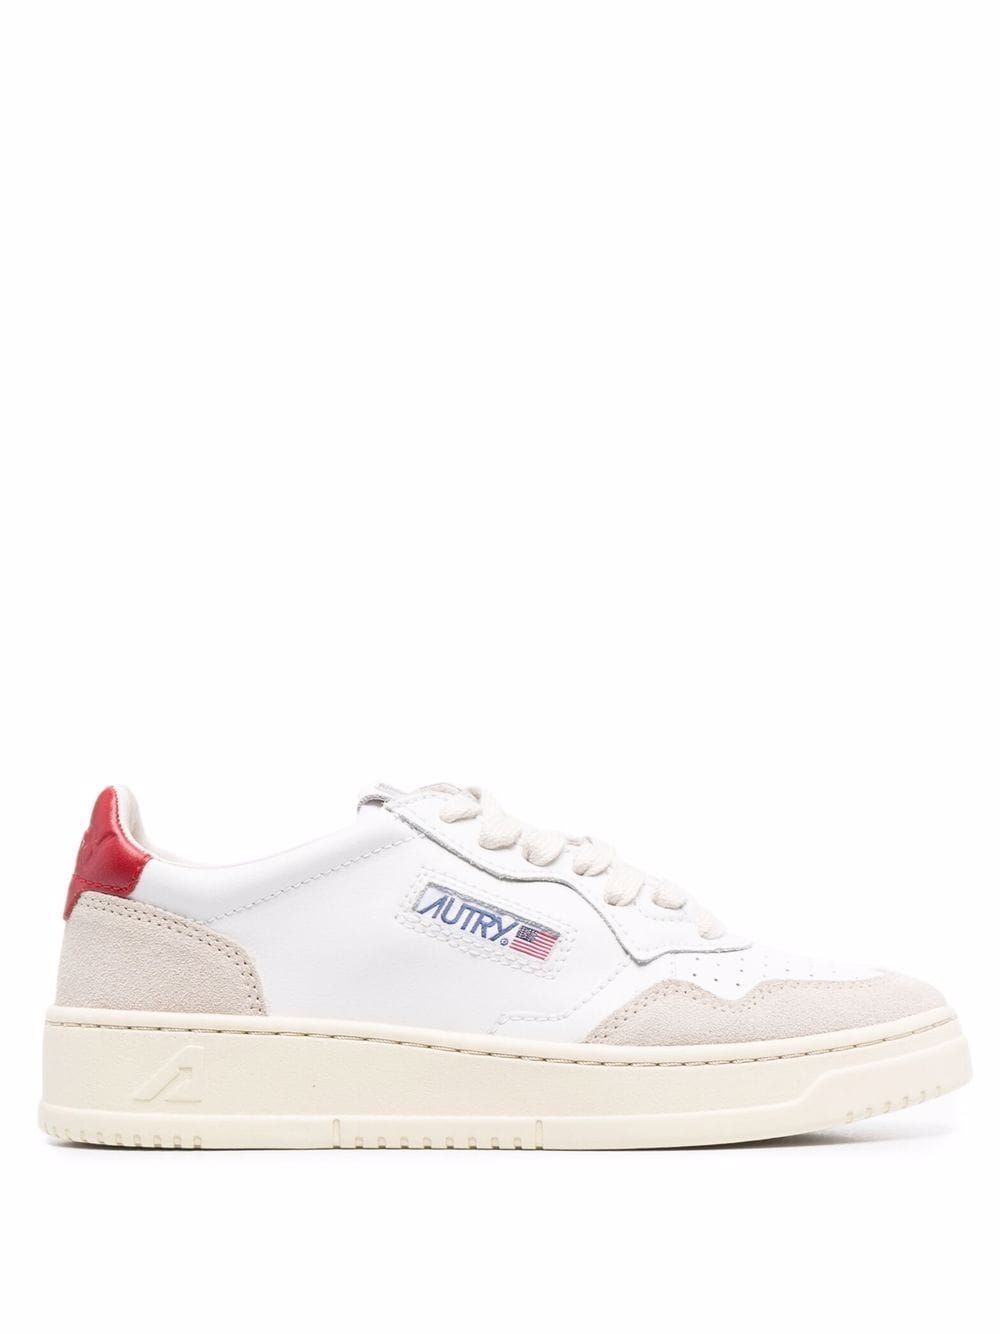 Autry side logo-patch sneakers - White von Autry